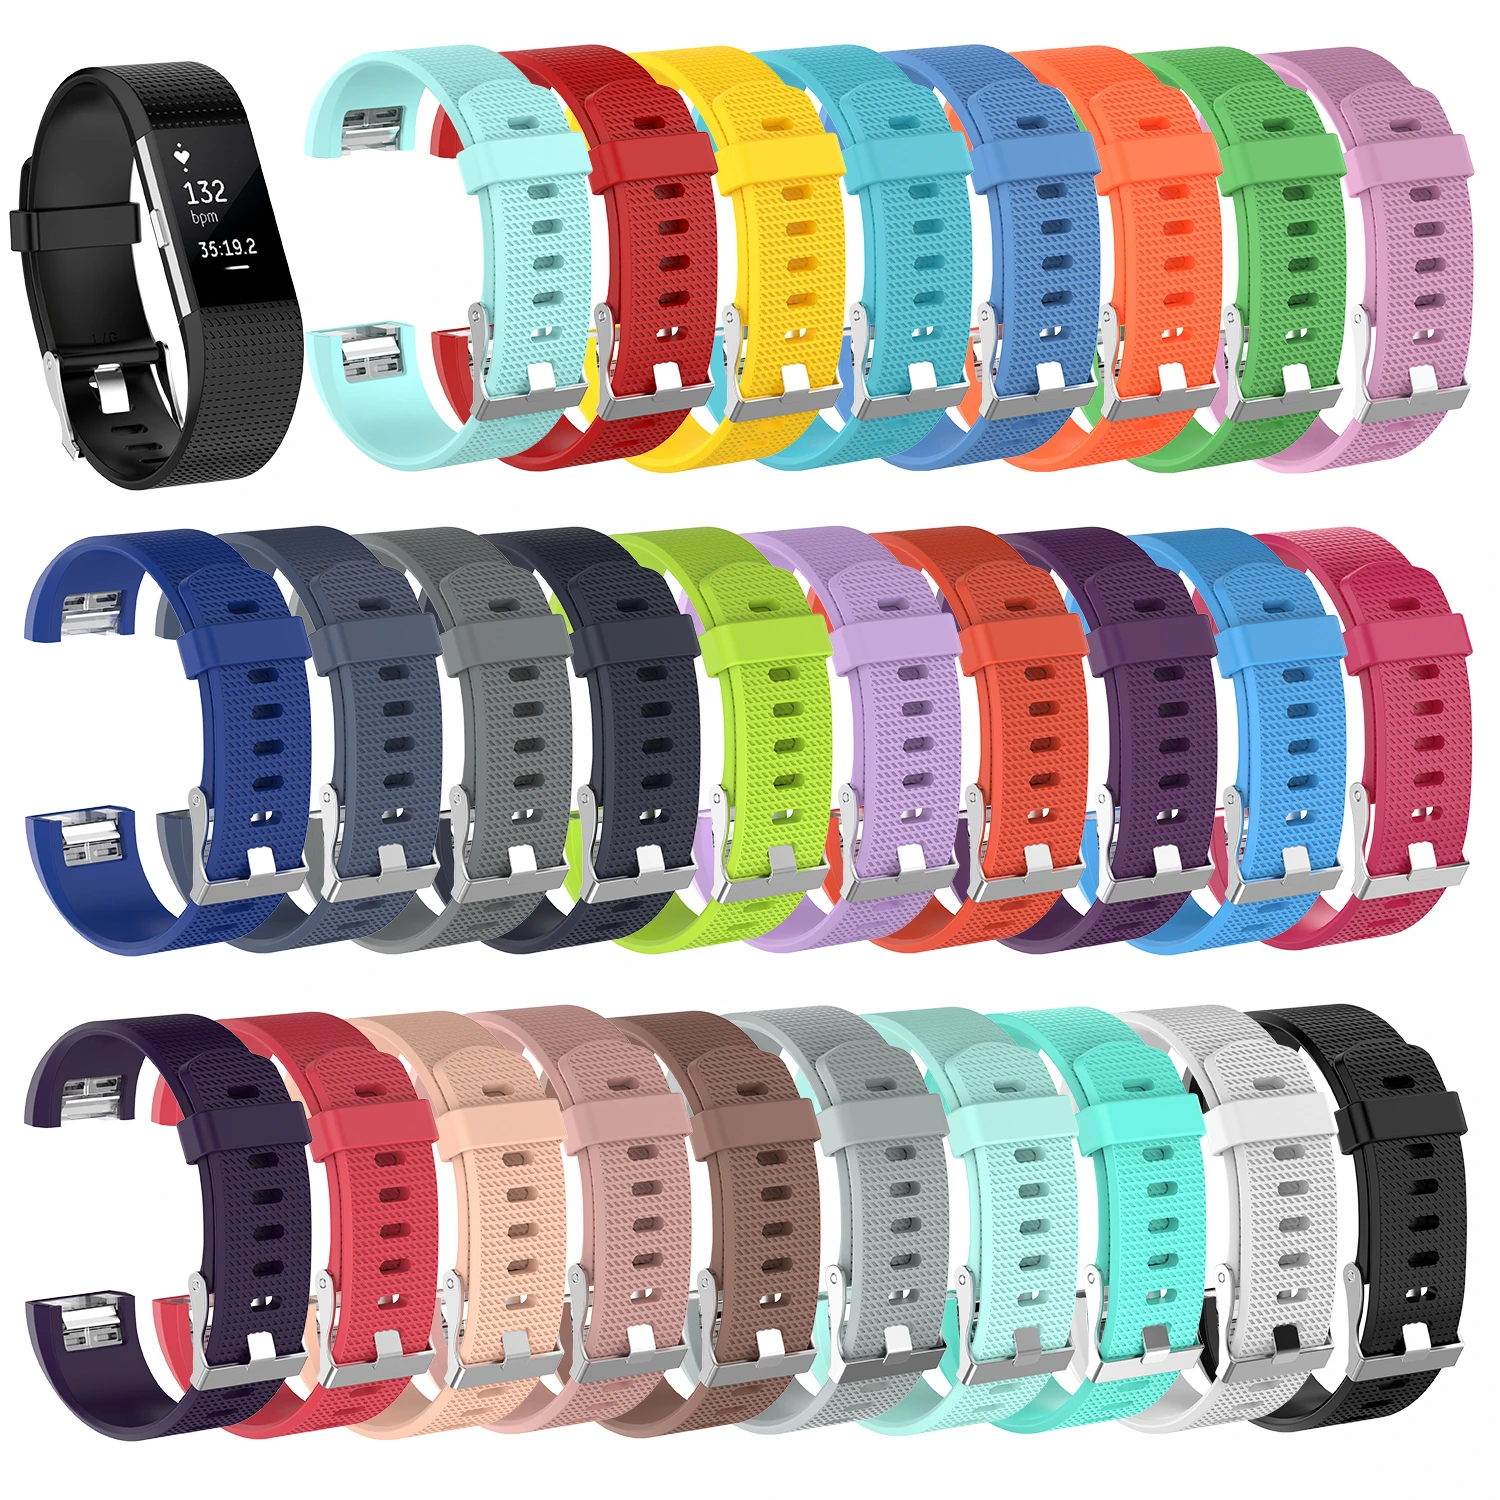 Sport Silicone Rubber Accessory Band Wriststrap Metal Buckle For Fitbit Charge 2 